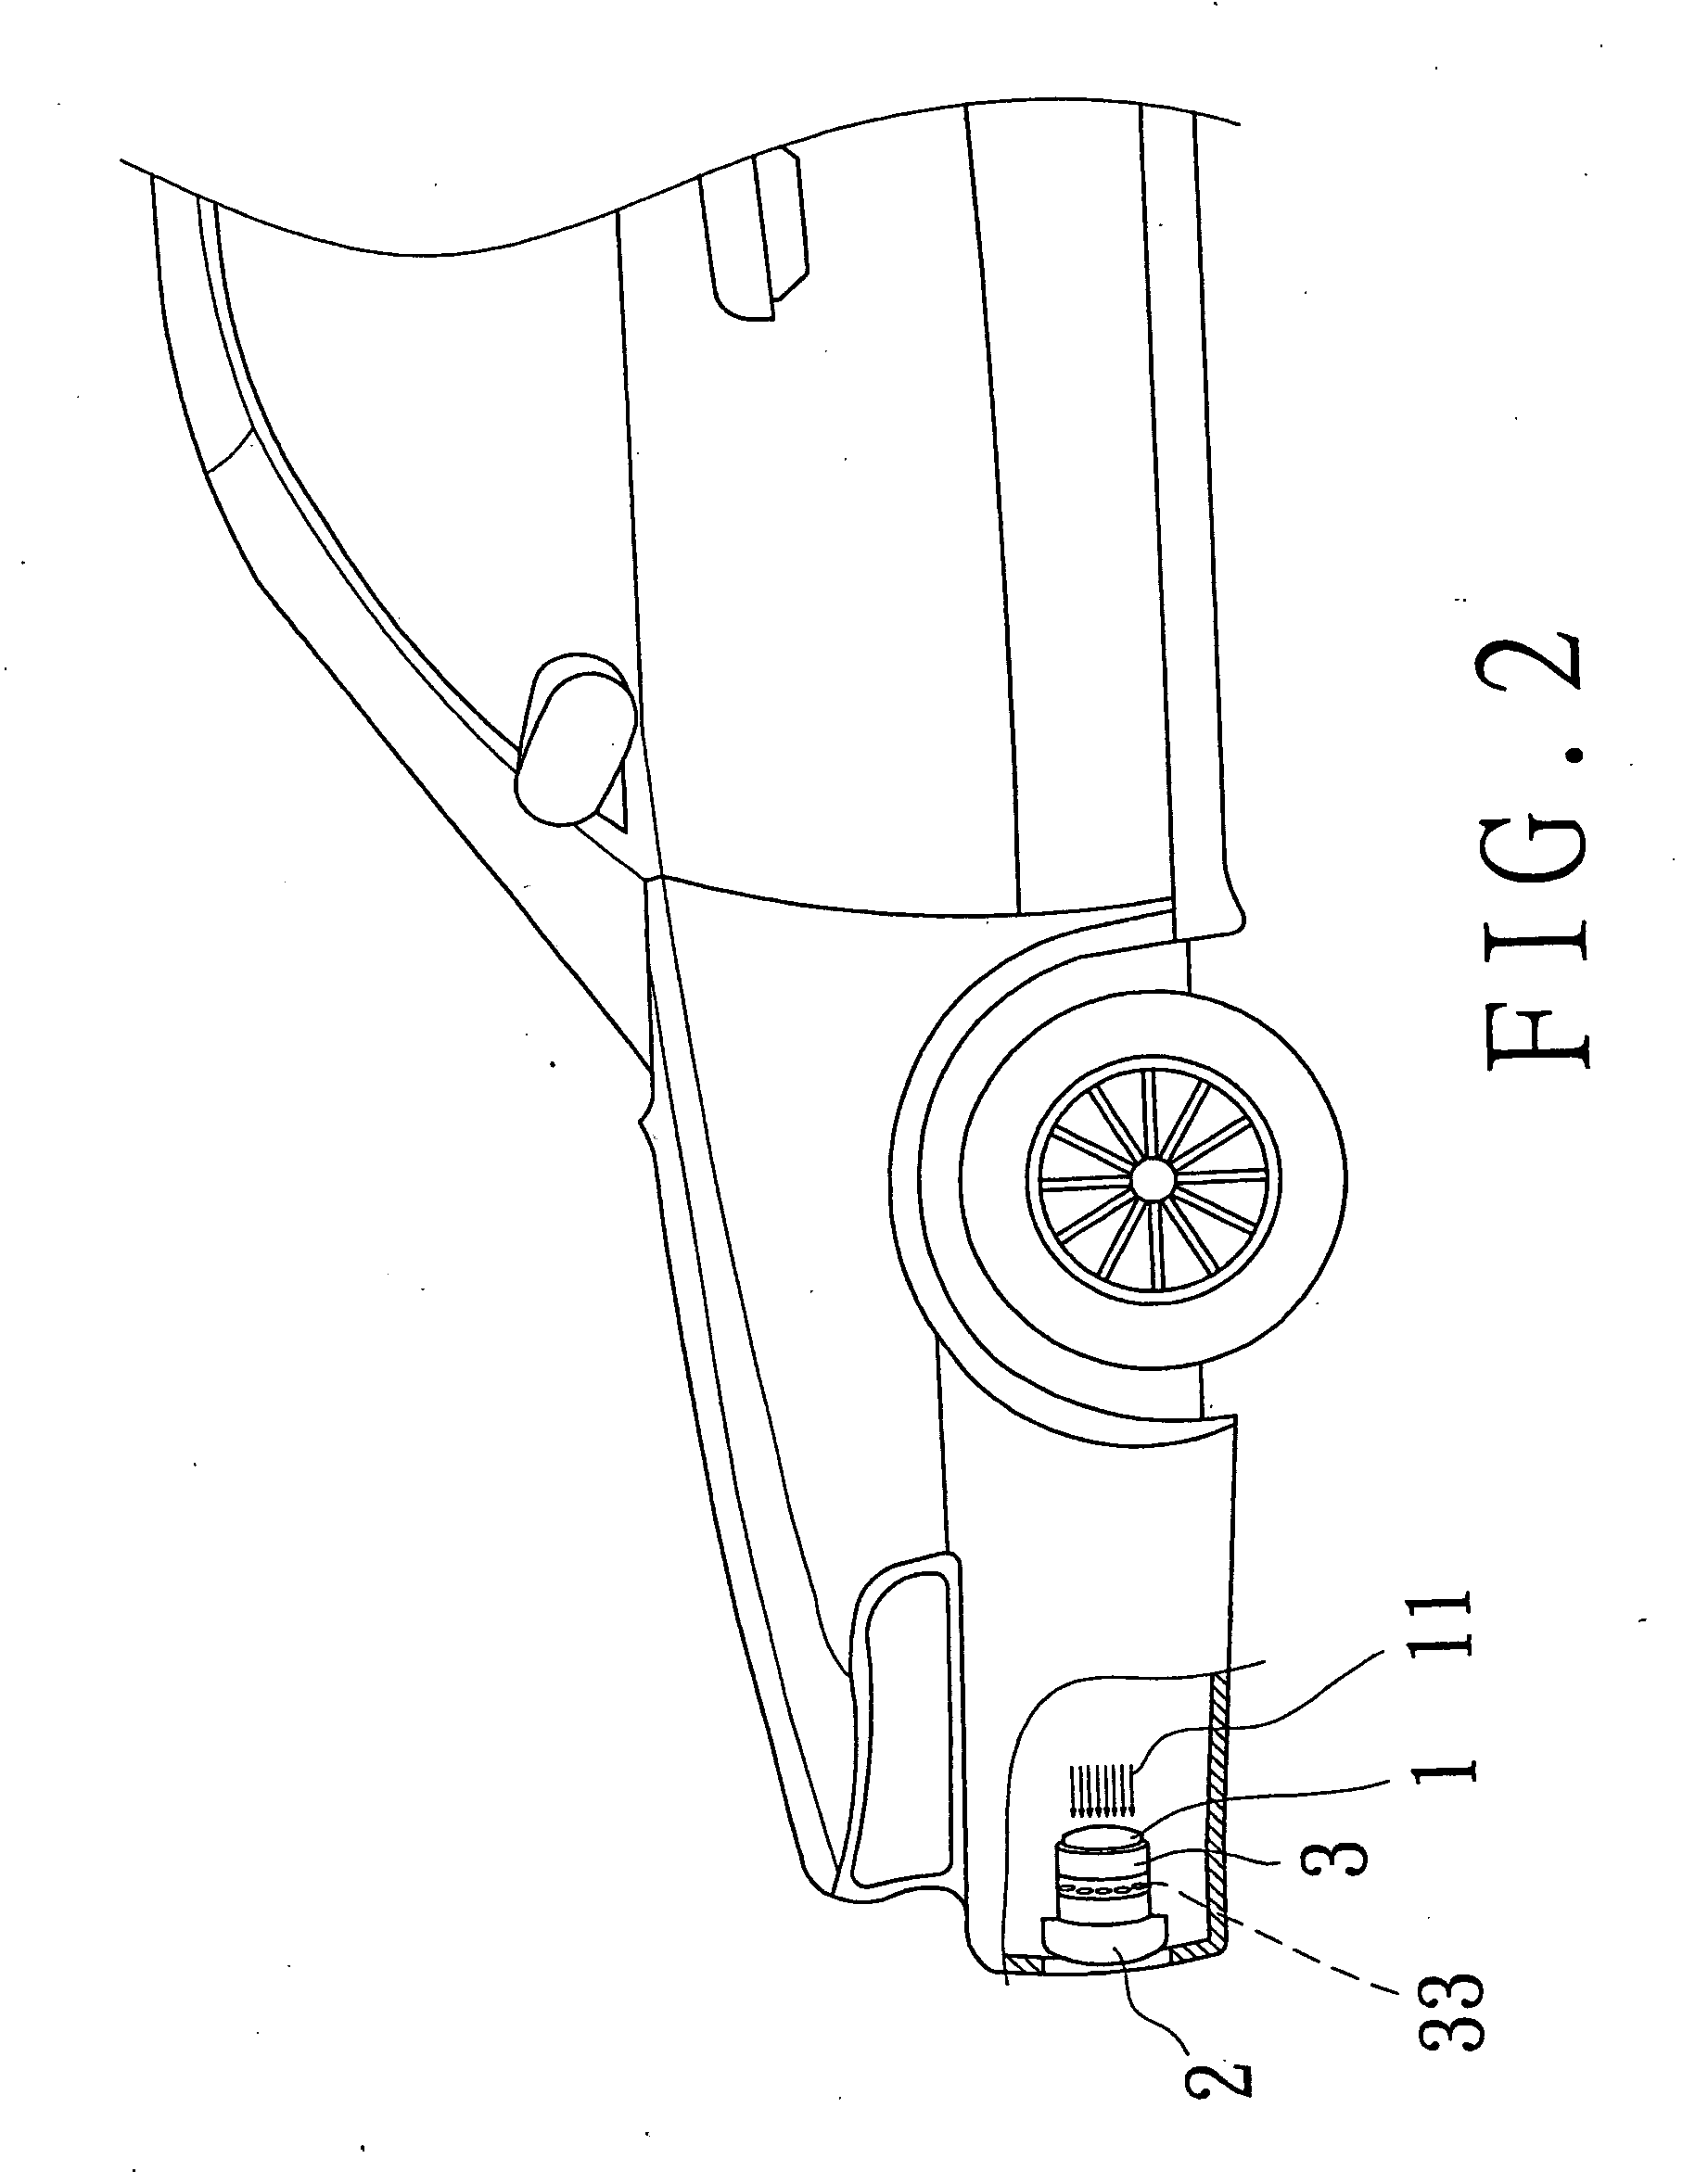 Power transfer-connecting device interposed between a power supply and a lamp of a vehicle